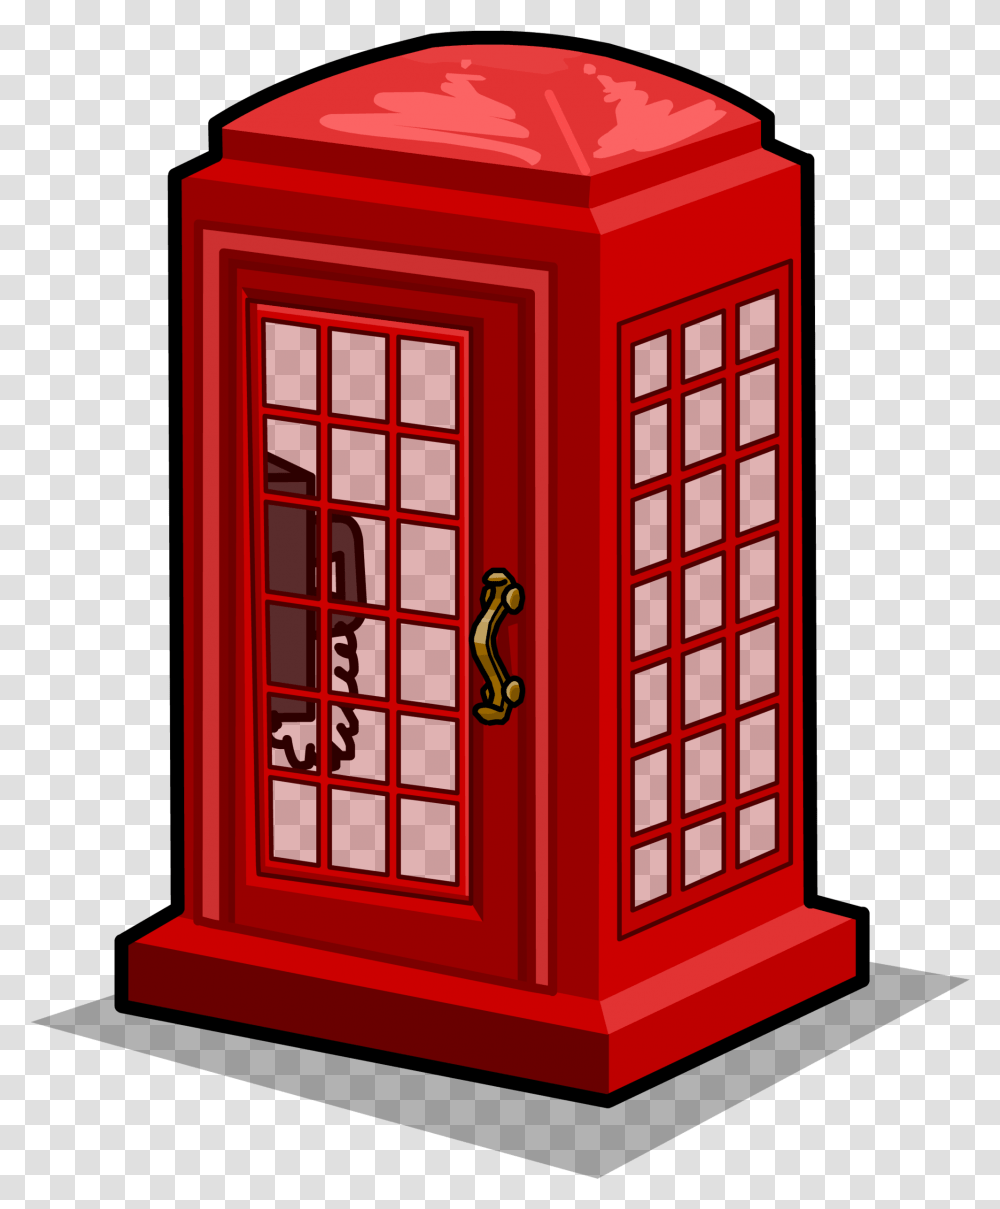 Download Phone Booth Image For Free, Mailbox, Letterbox, Kiosk Transparent Png